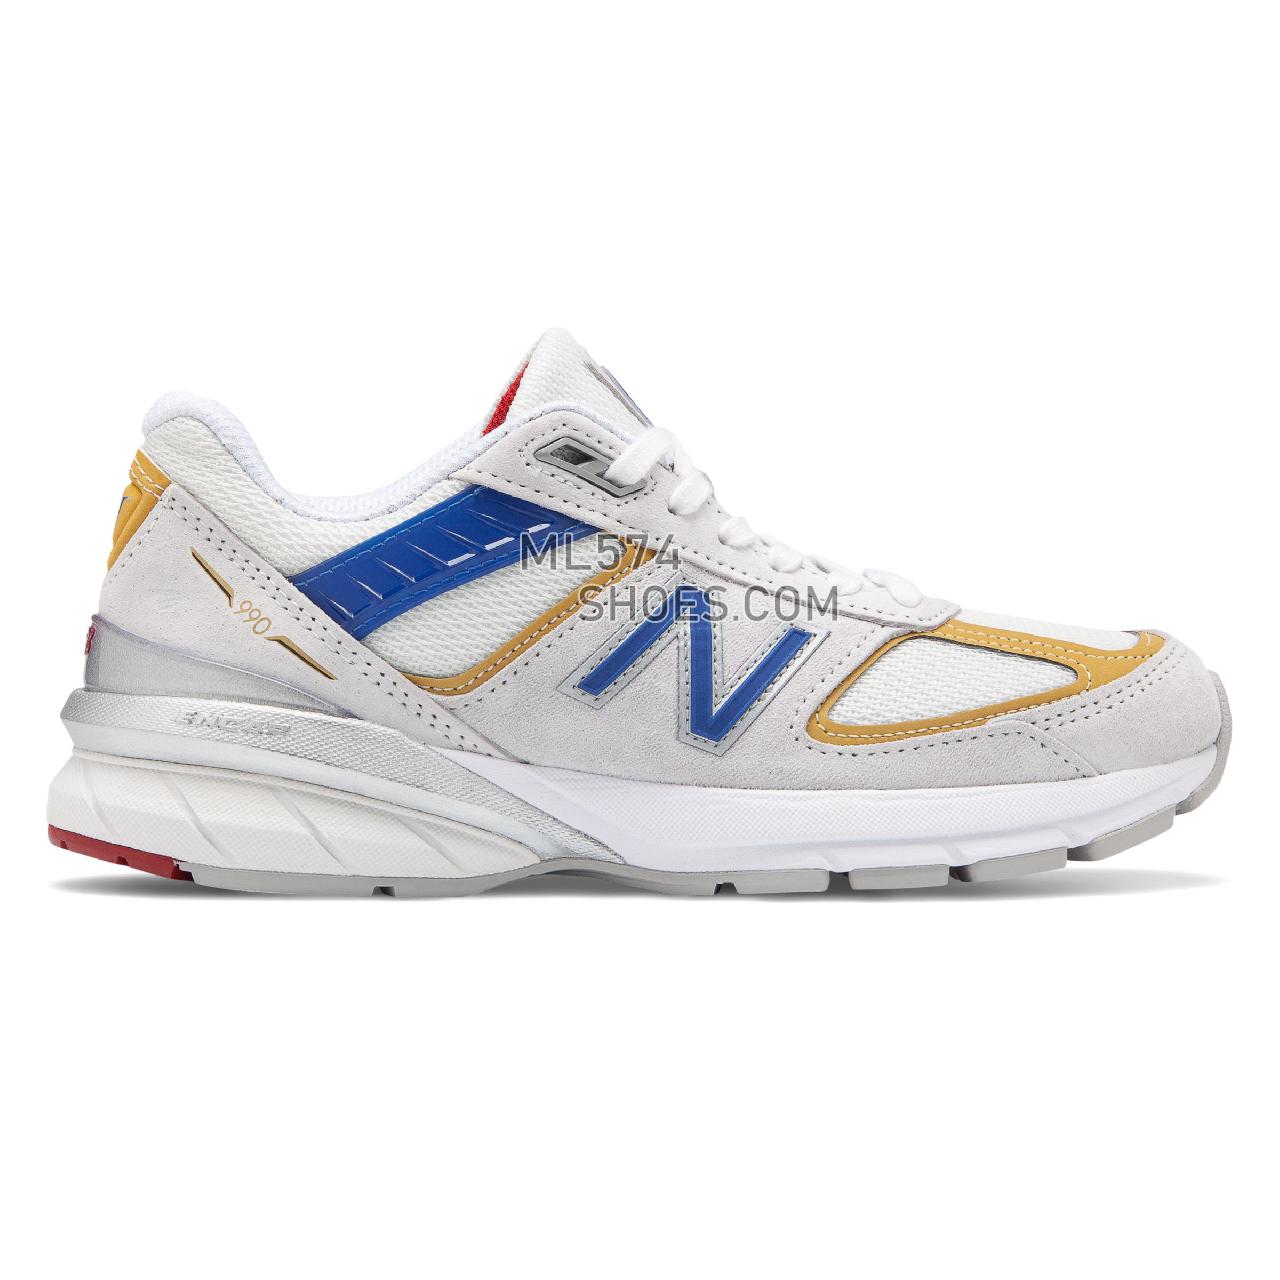 New Balance 990v5 Made in US - Women's Neutral Running - Nimbus Cloud with Team Red - W990NR5